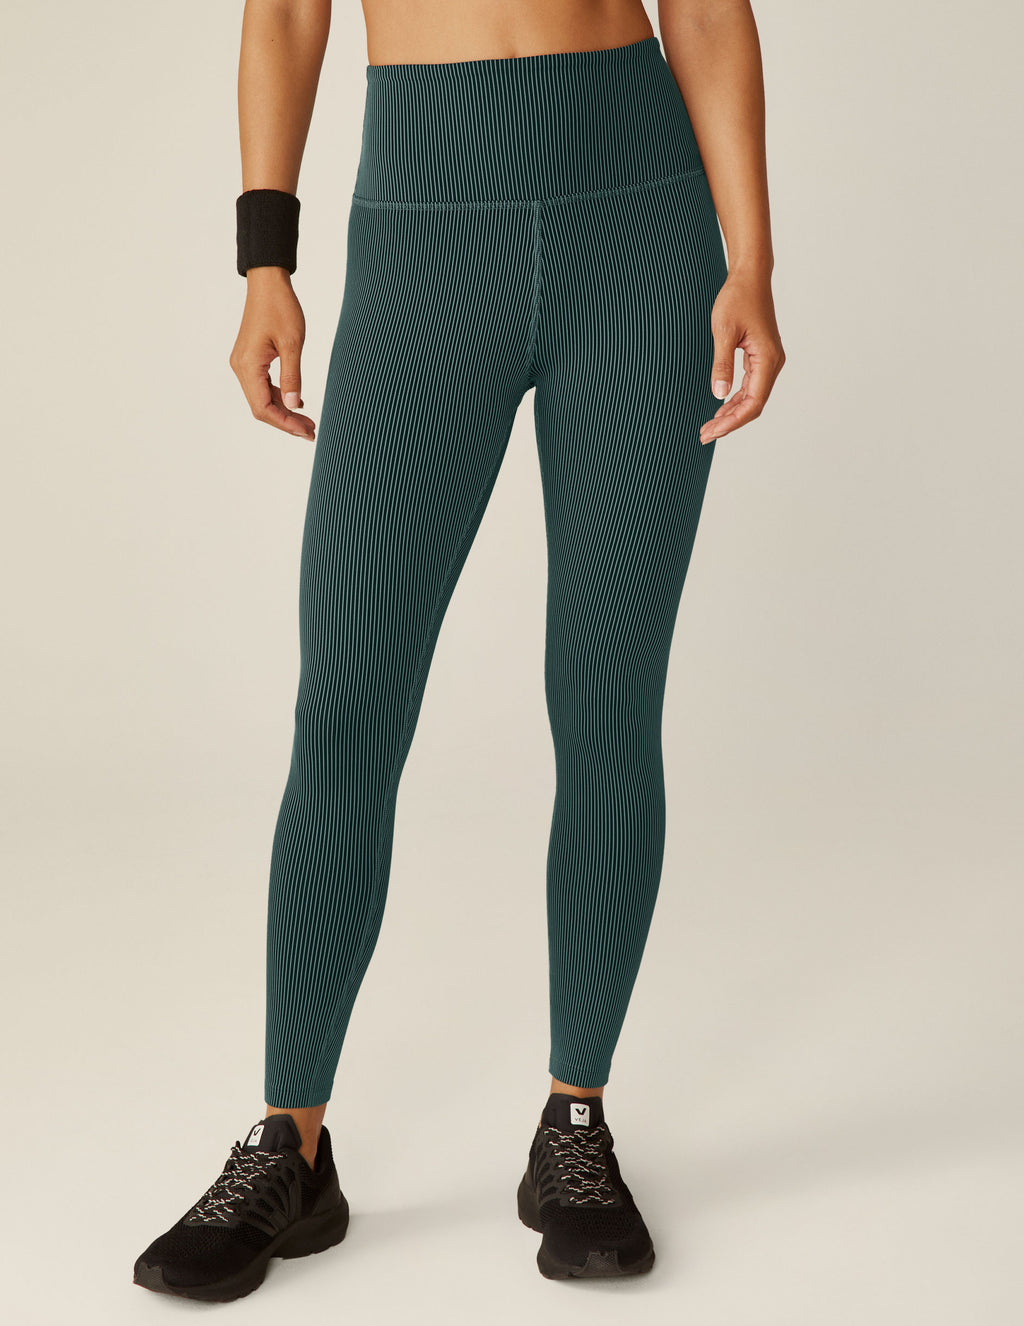 Yoga Fitness Sherpa Leggings - Clothing & Merch - by Beibei Factory